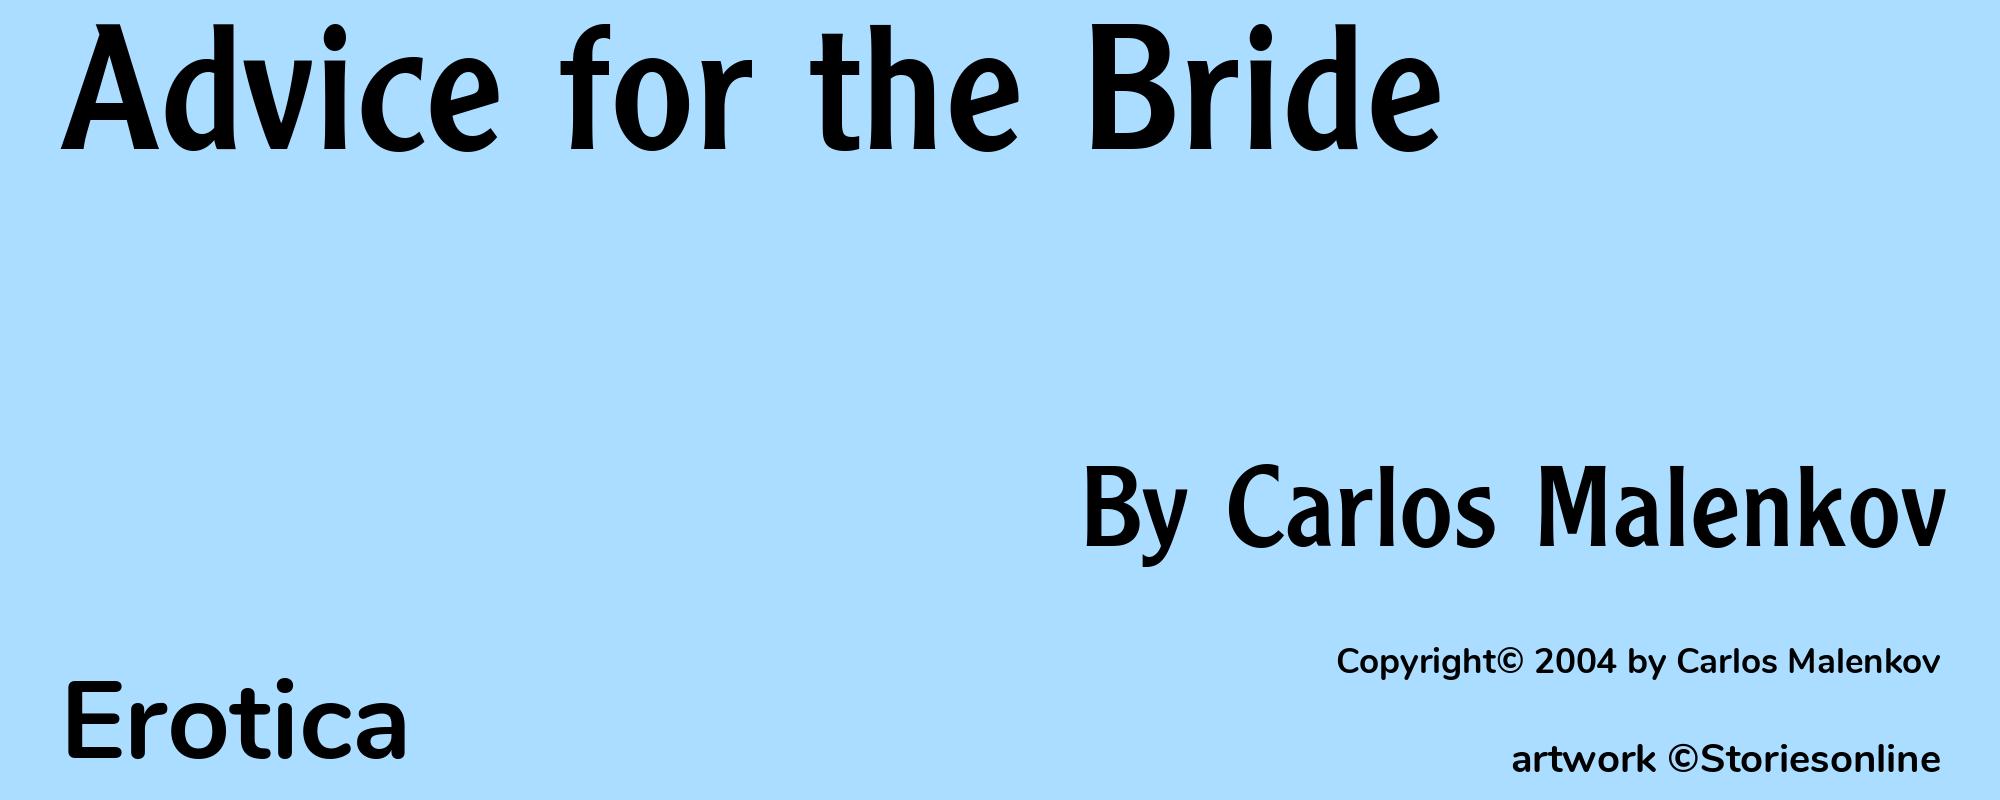 Advice for the Bride - Cover